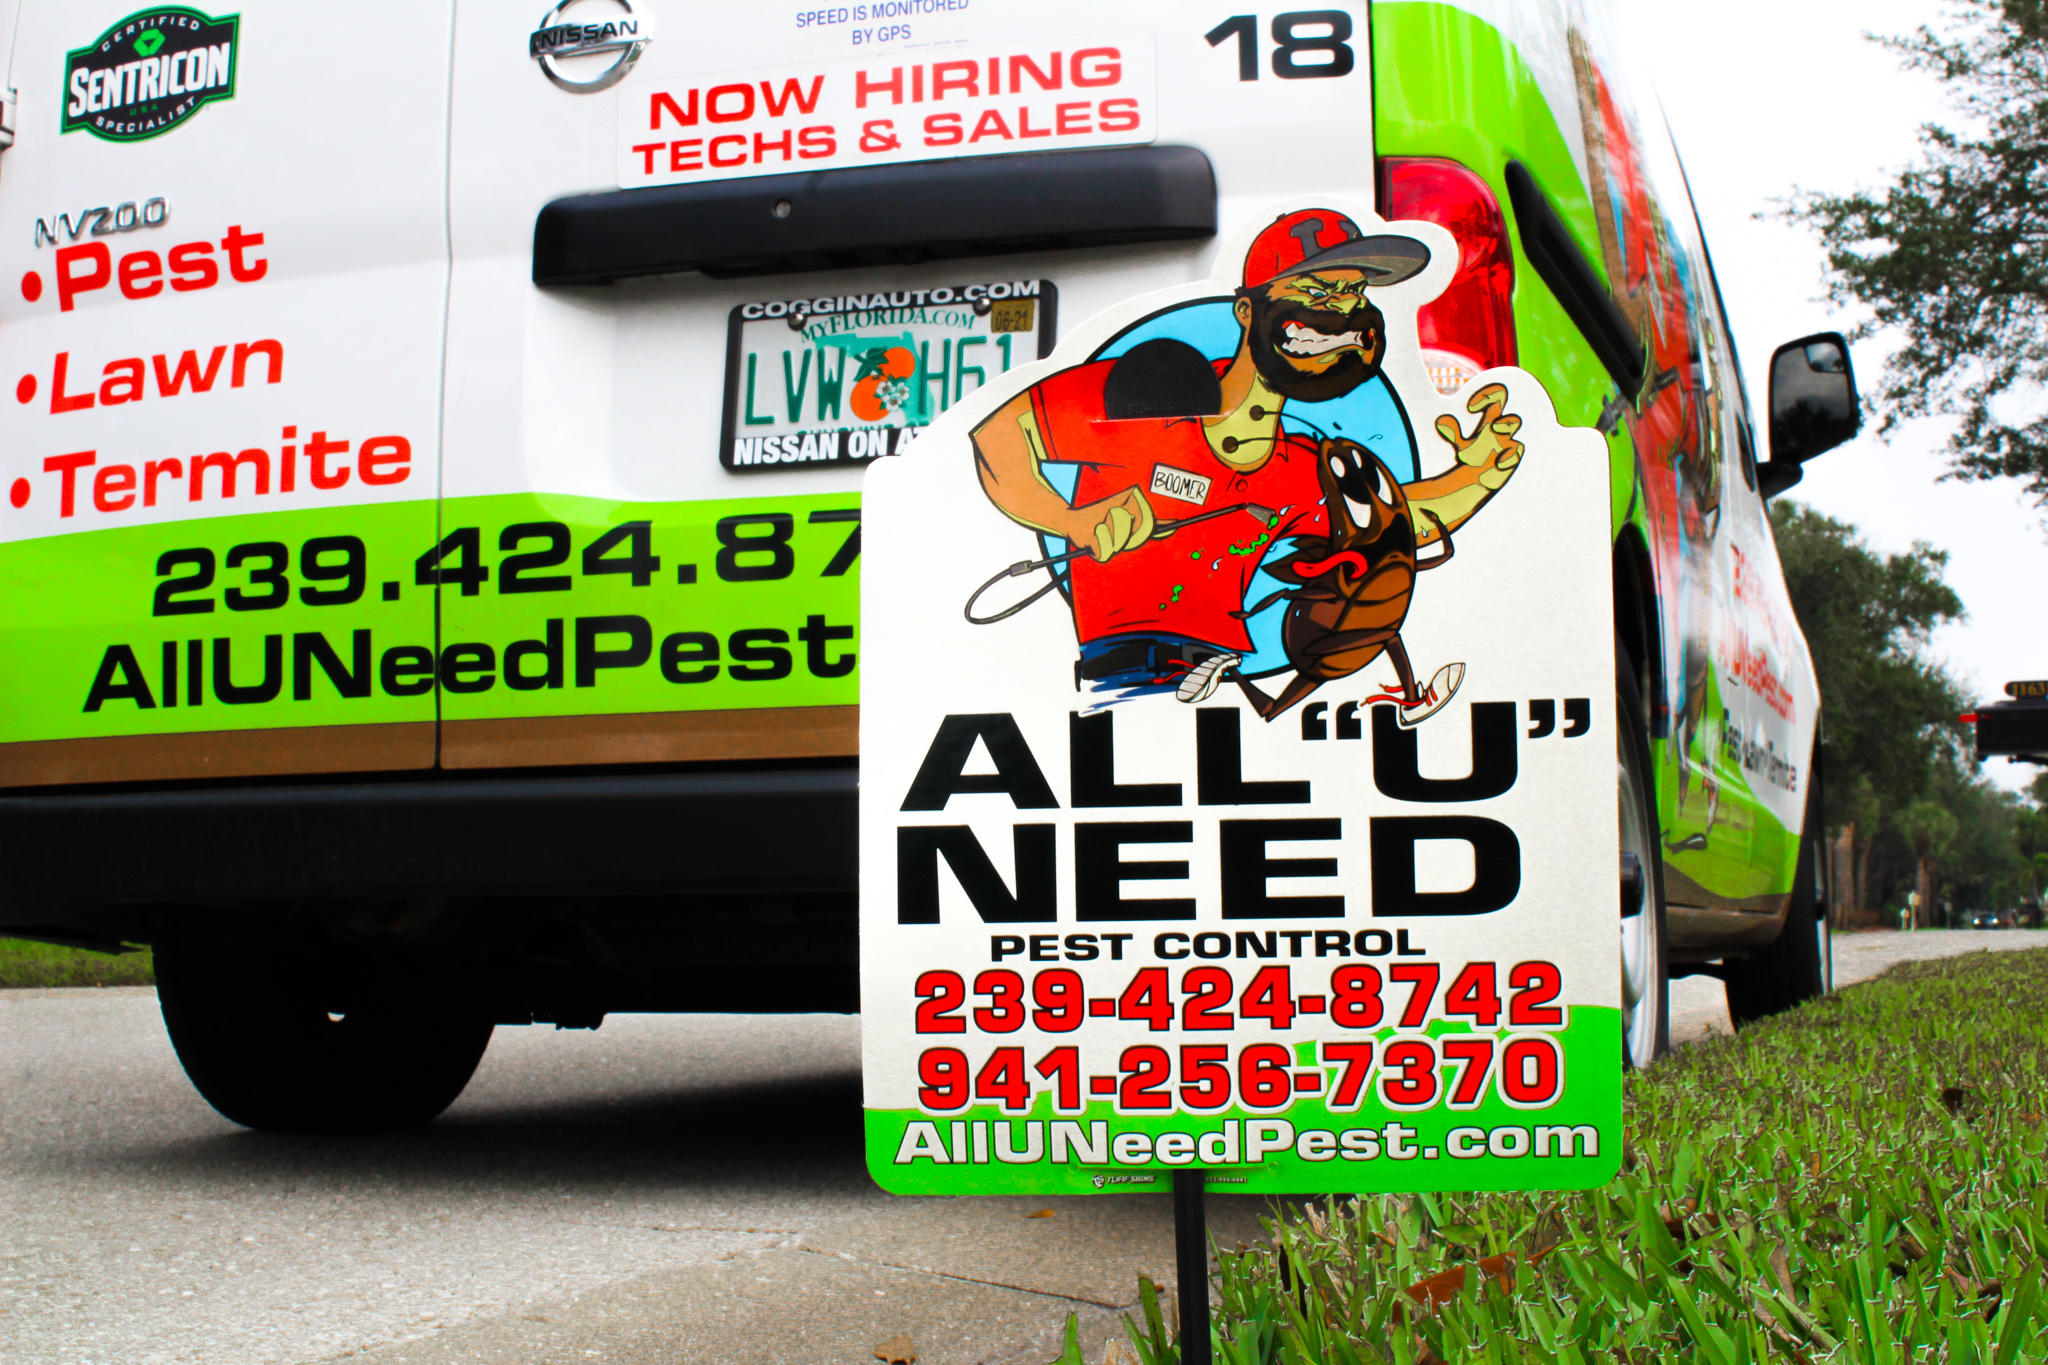 From roaches to weeds and termites to wasps, All “U” Need is all you will ever need. No one likes an uninvited pest! Call us today for all your pest problems!